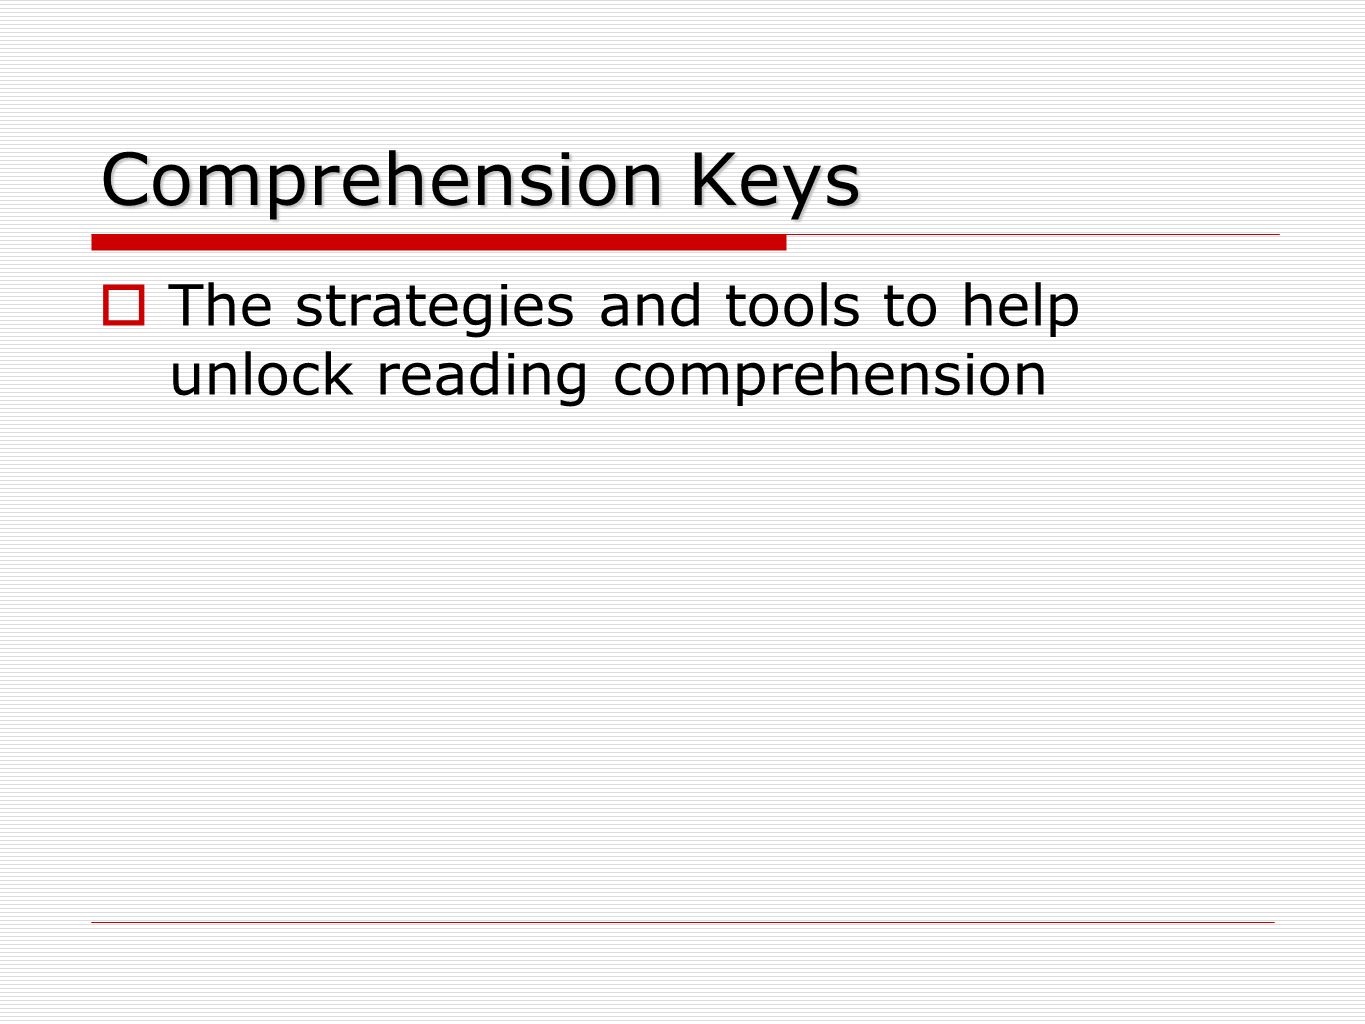 Comprehension Keys The strategies and tools to help unlock reading comprehension